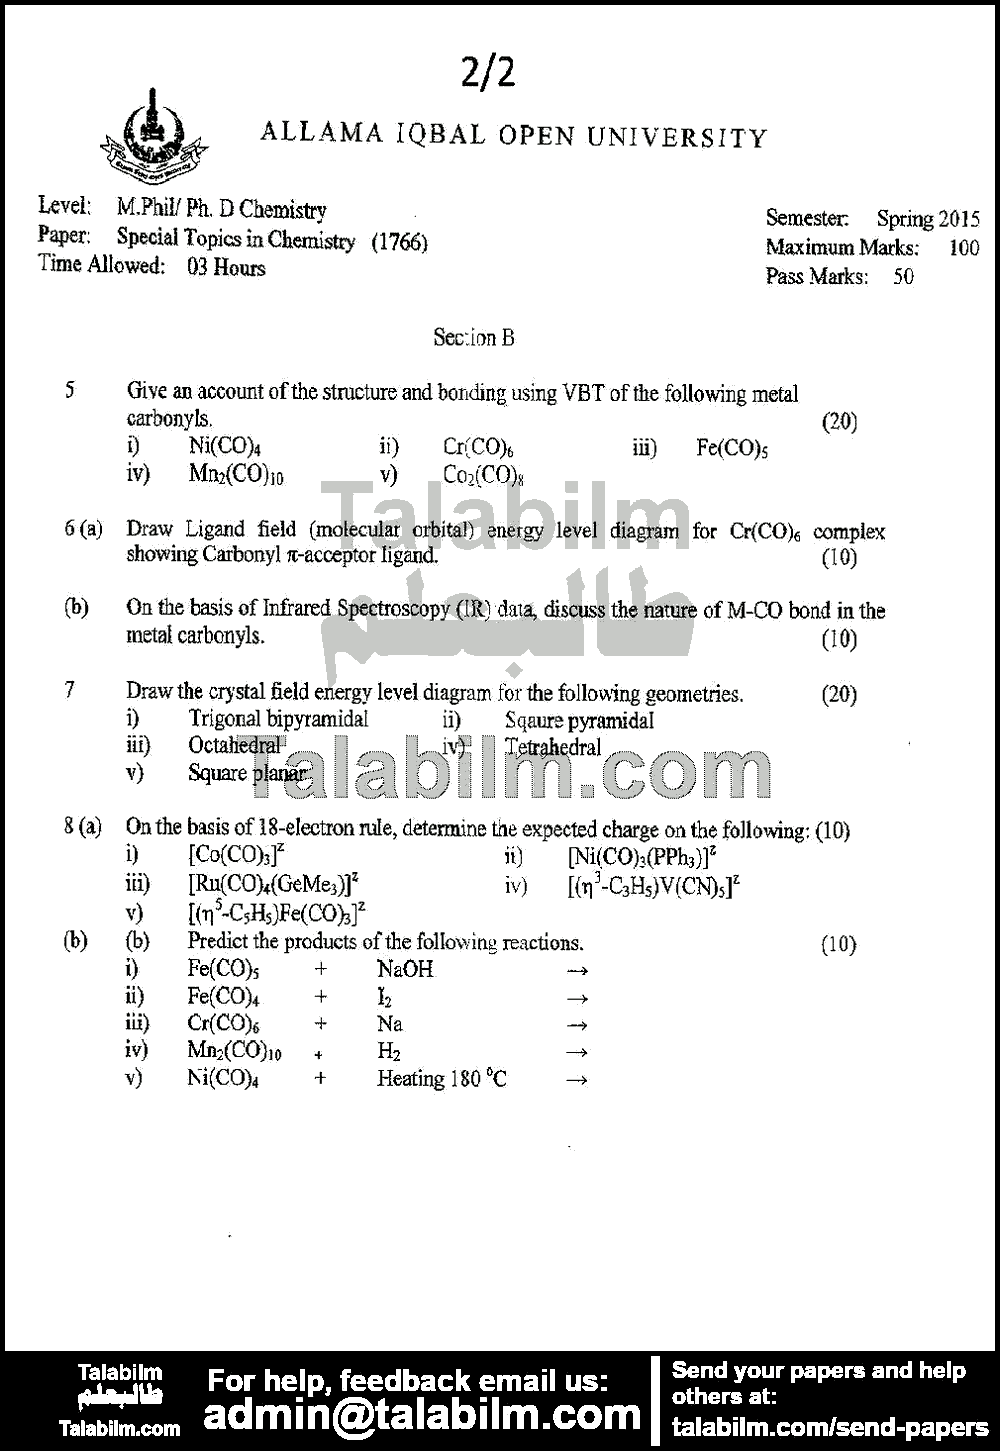 Special Topic in Chemistry 1766 past paper for Spring 2015 Page No. 2